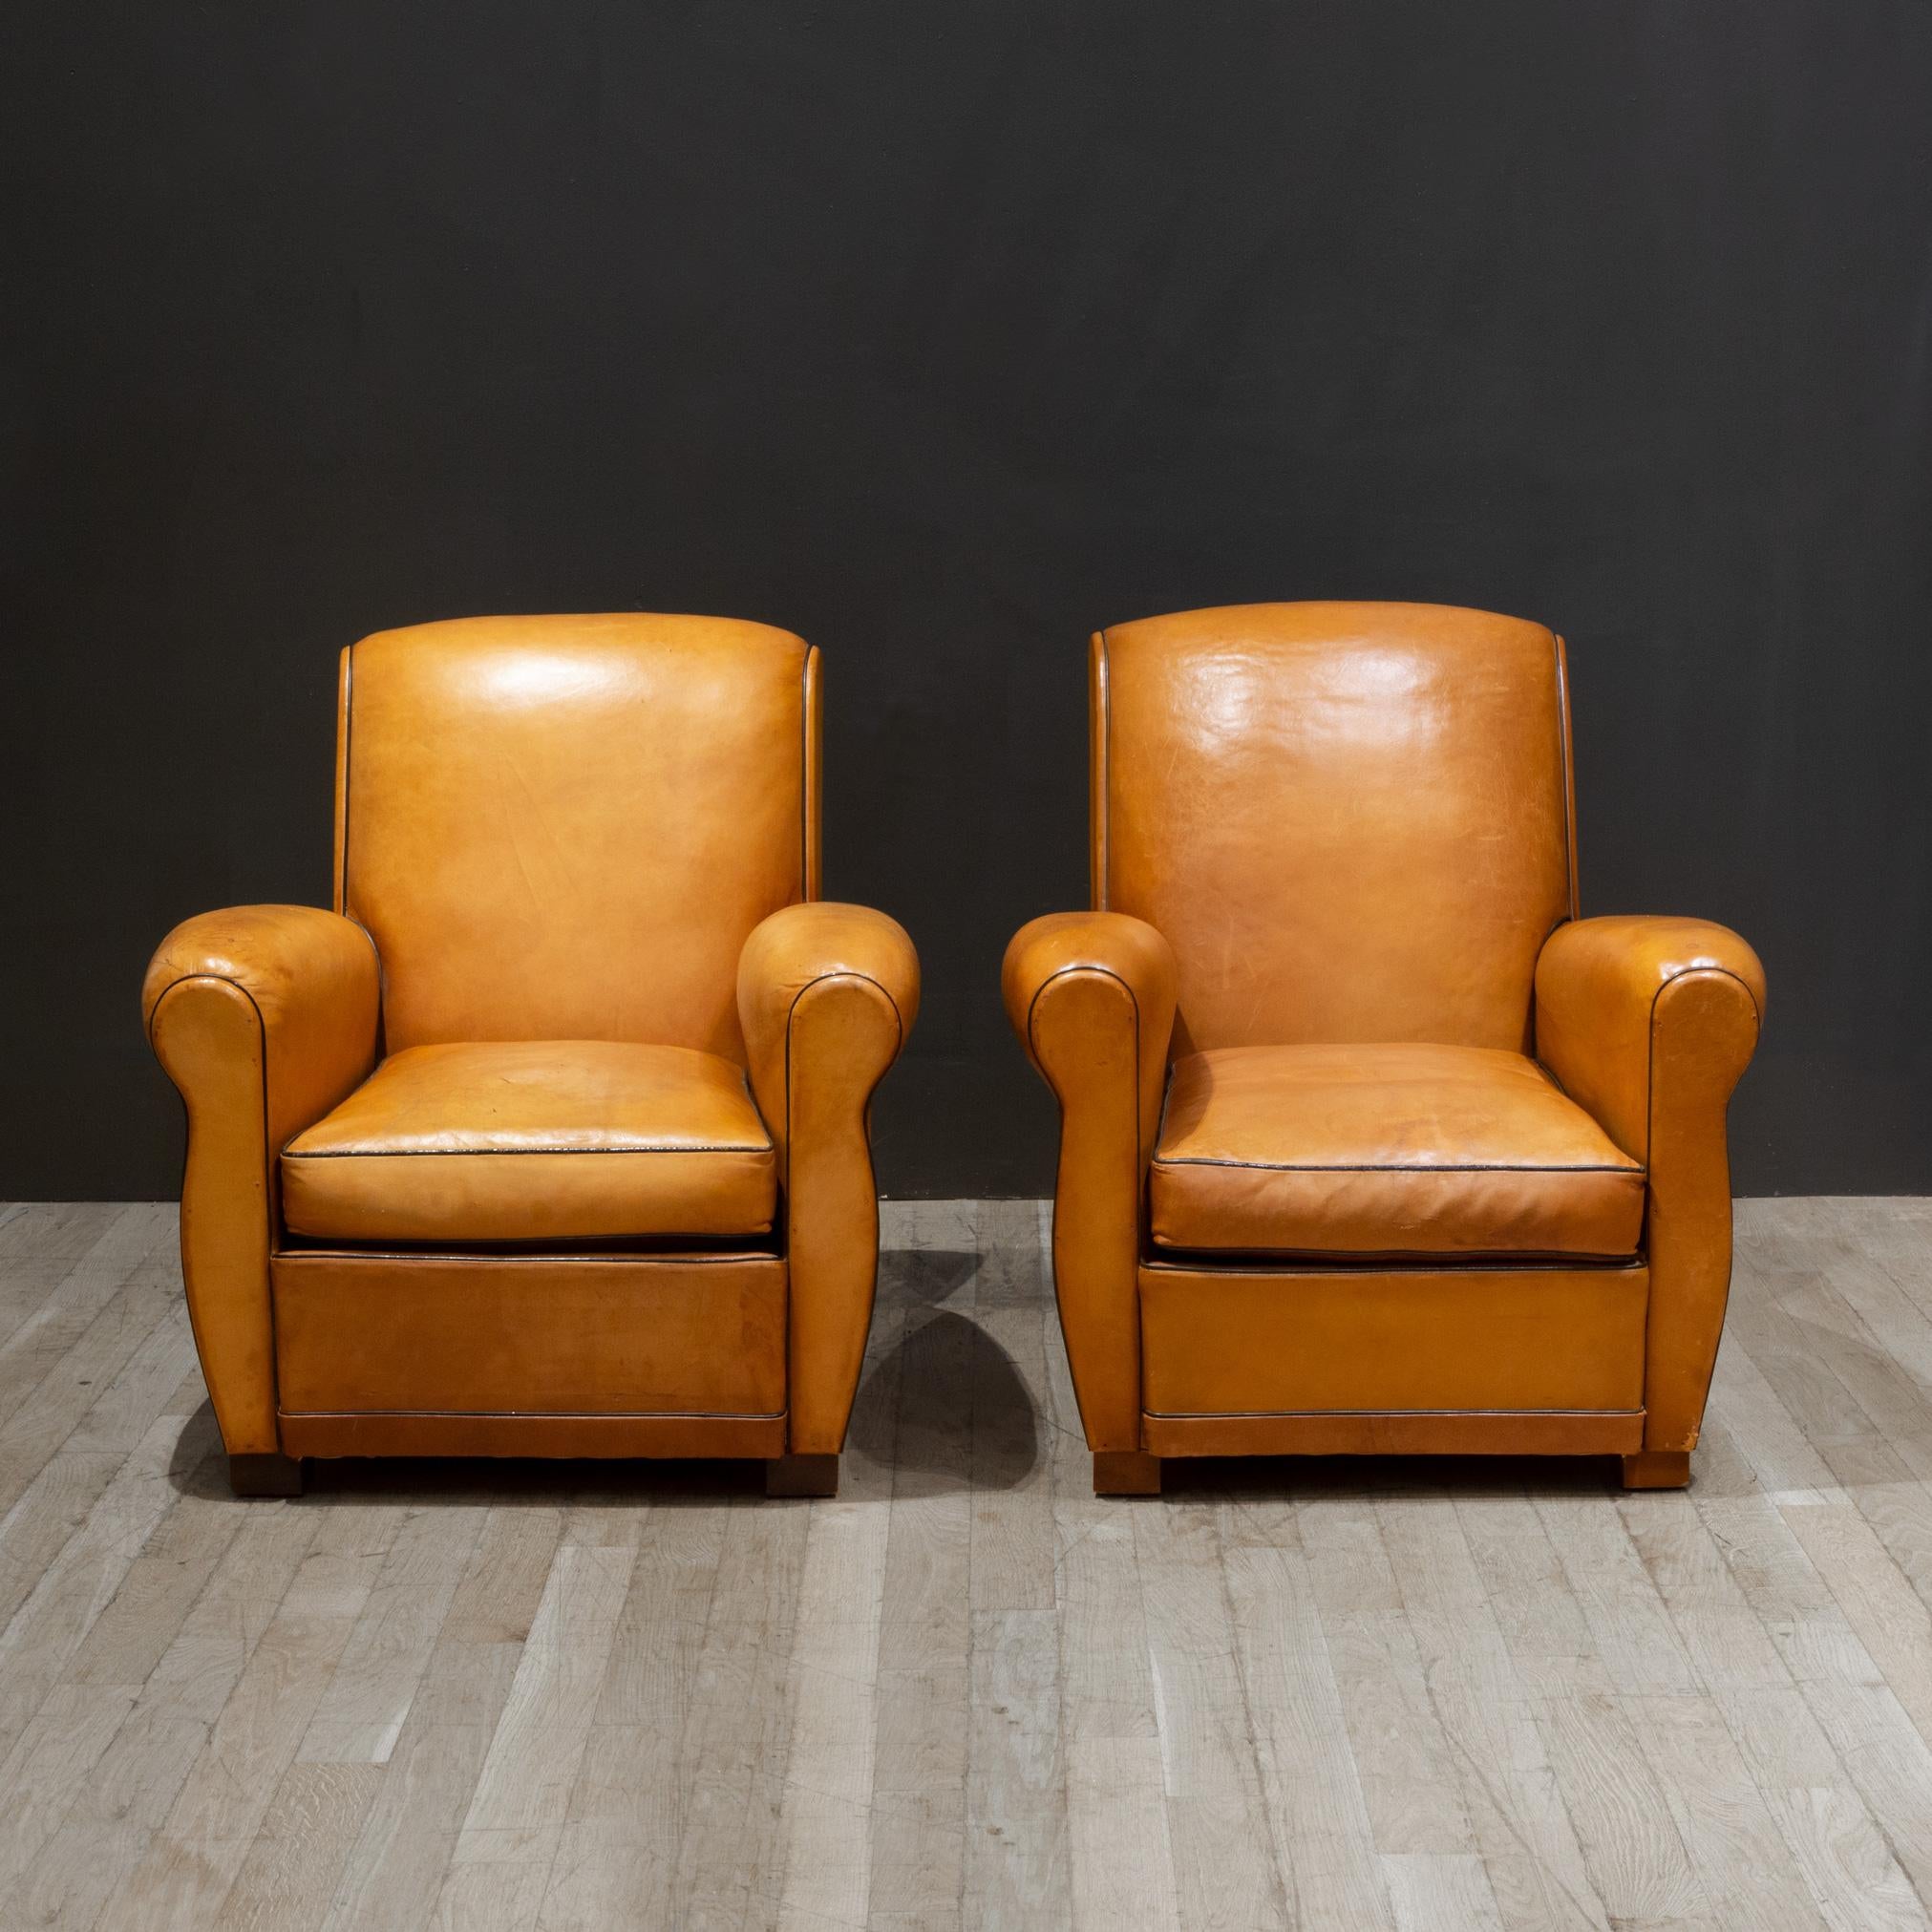 Industrial Pair of French Slopeback Light Caramel Leather Club Chairs c.1930-1940 For Sale